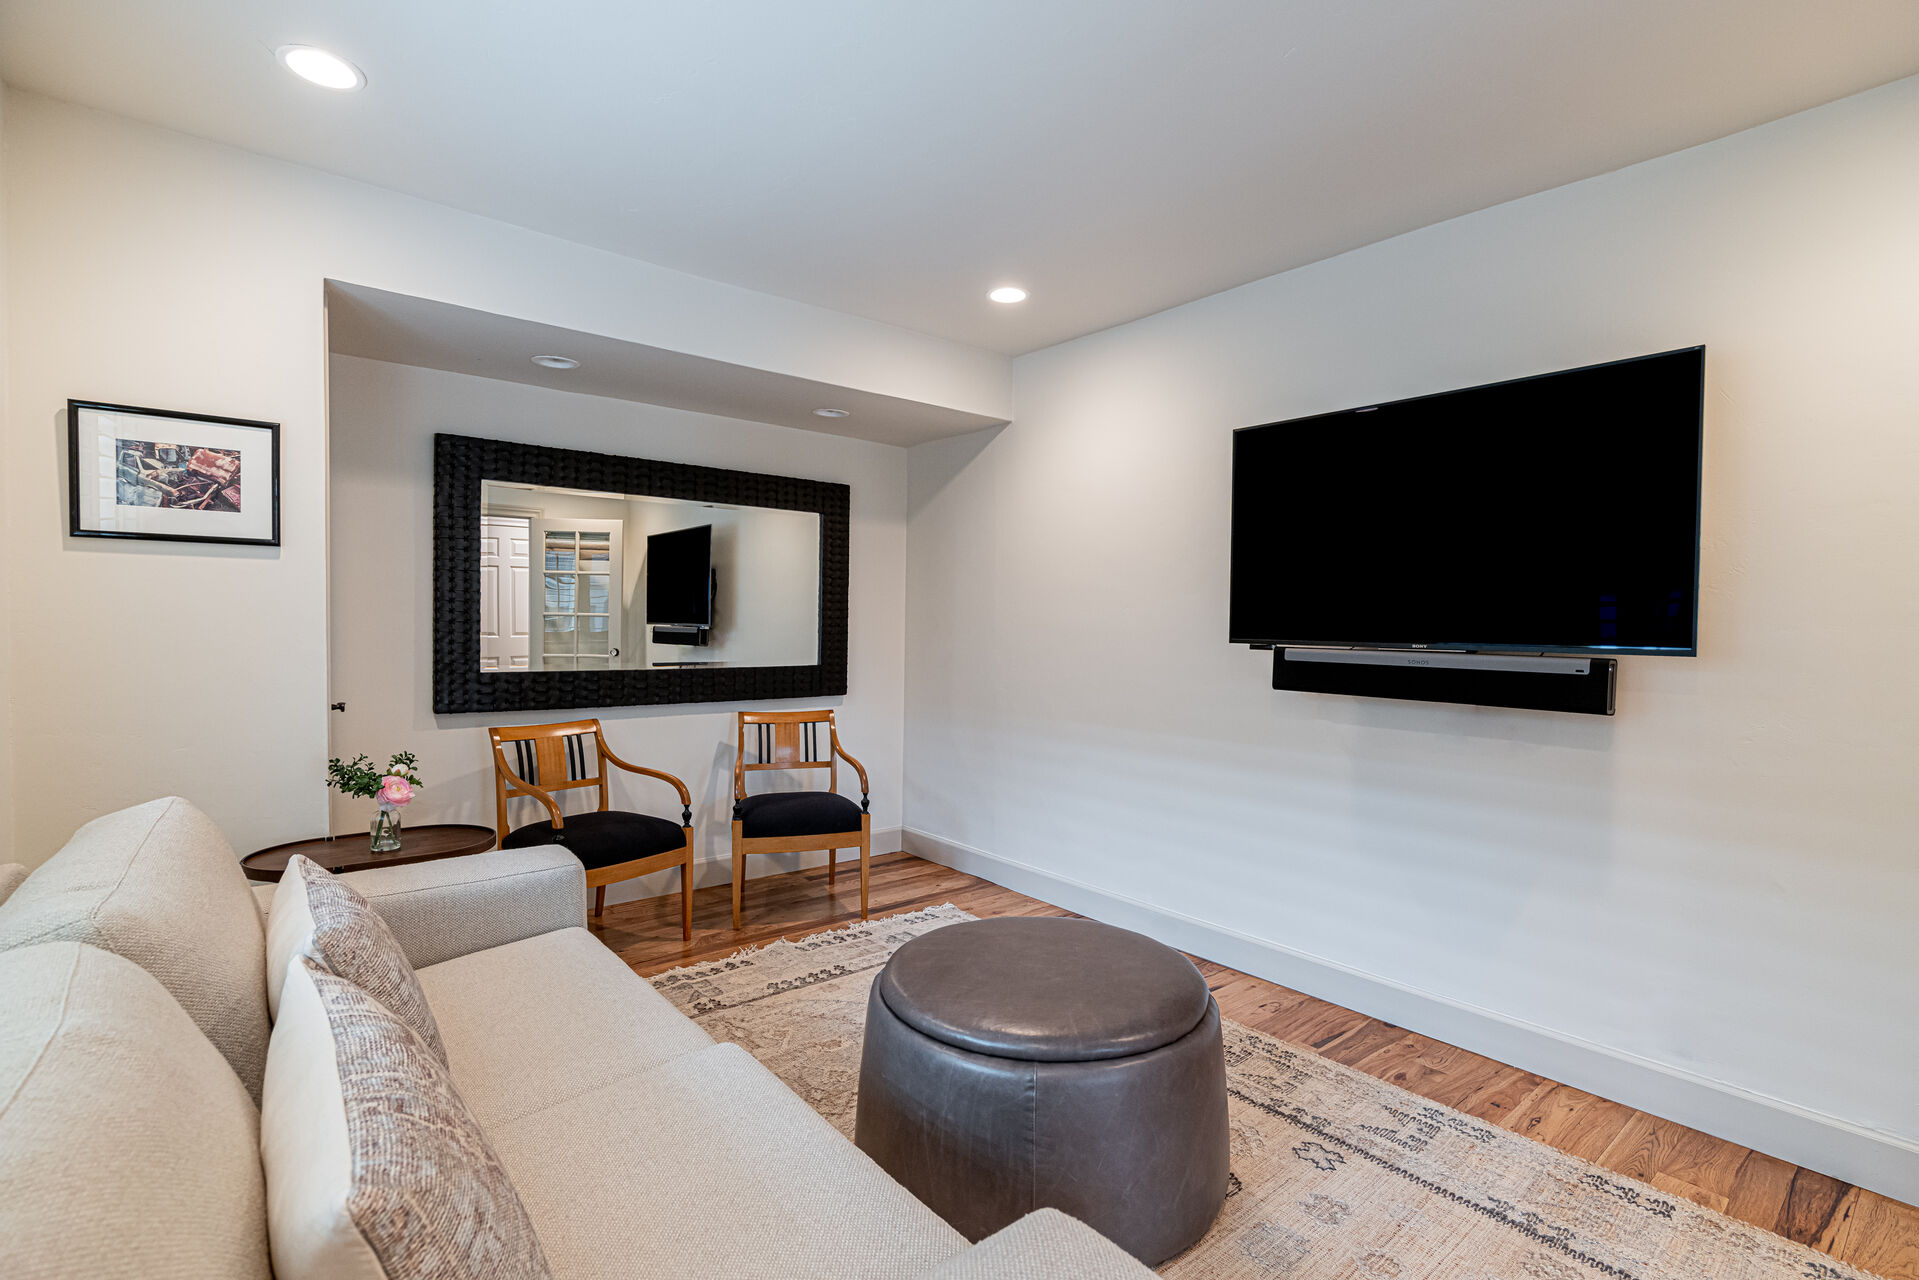 Main Level Den with a Smart TV and Sonos